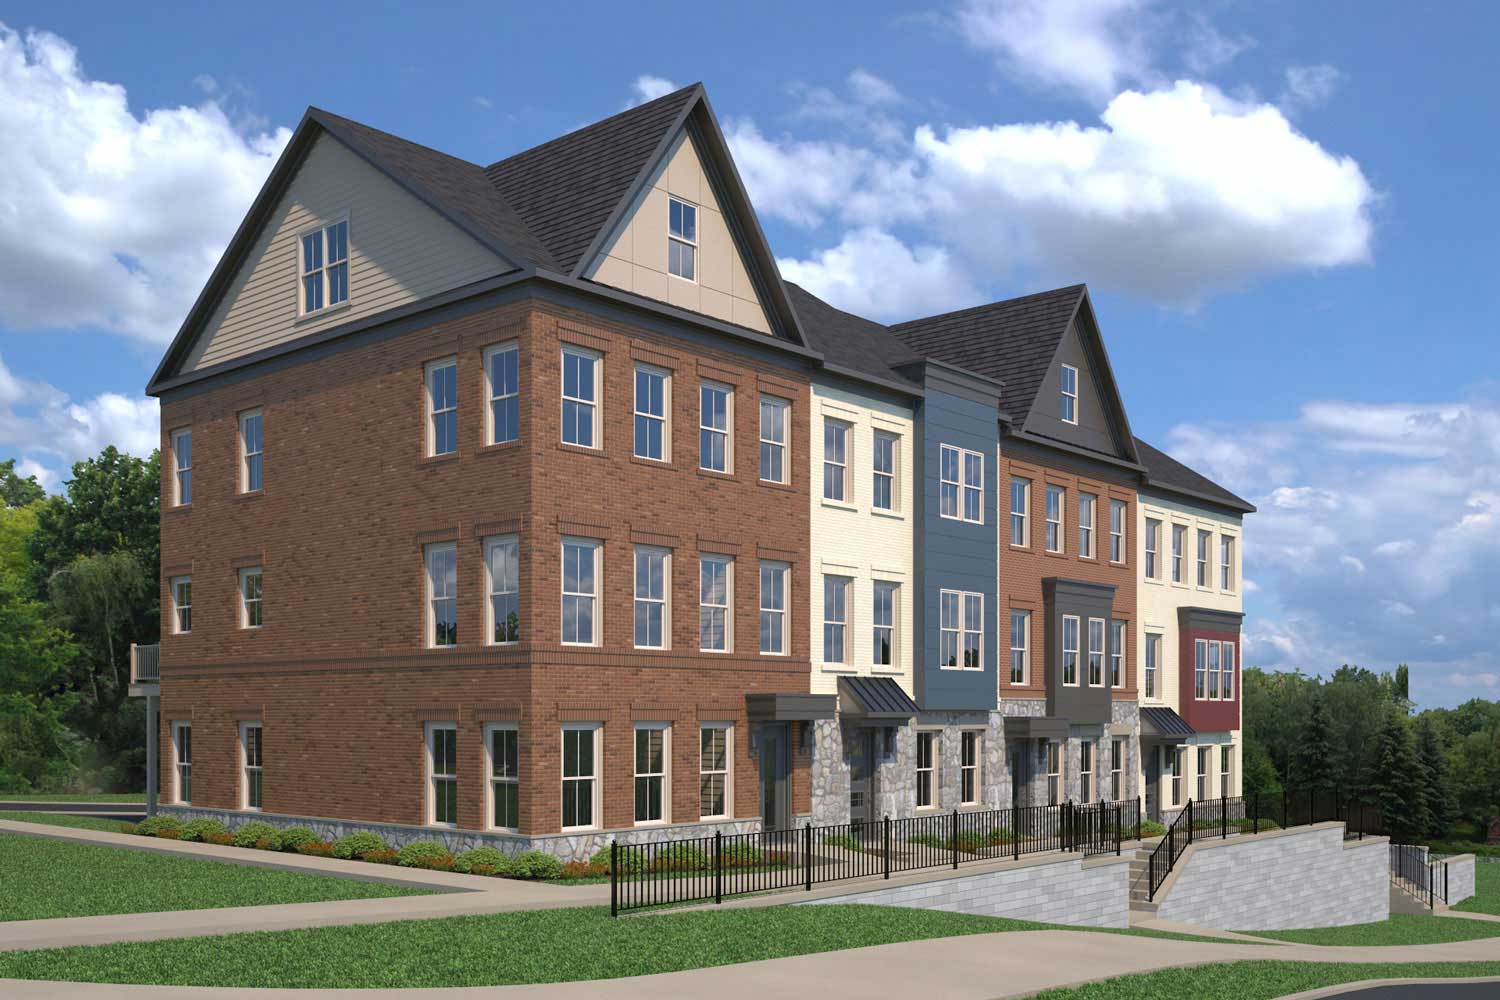 Elevator Townhomes in Montgomery Co, MD, The Village at Cabin Branch by Craftmark Homes